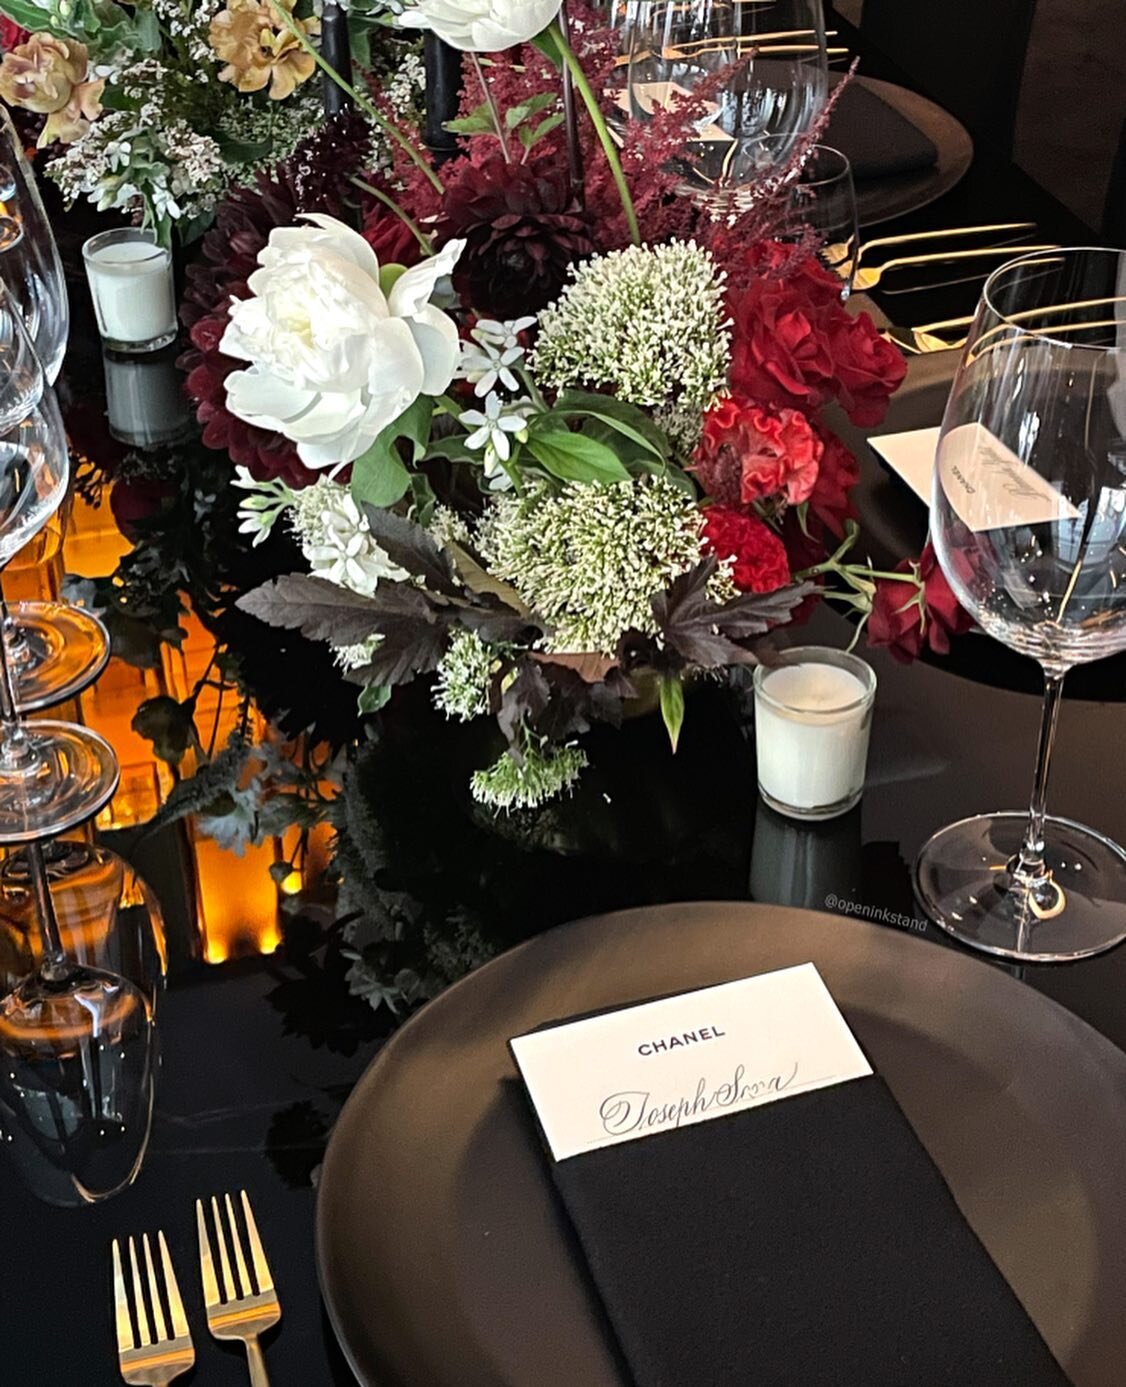 Such a memorable time working onsite at @spagolv for this amazing dinner hosted by Chanel. I sat in the back room and had full view of the Bellagio fountains as I worked on last minute calligraphy needs. Tried very hard not to be TOO distracted while